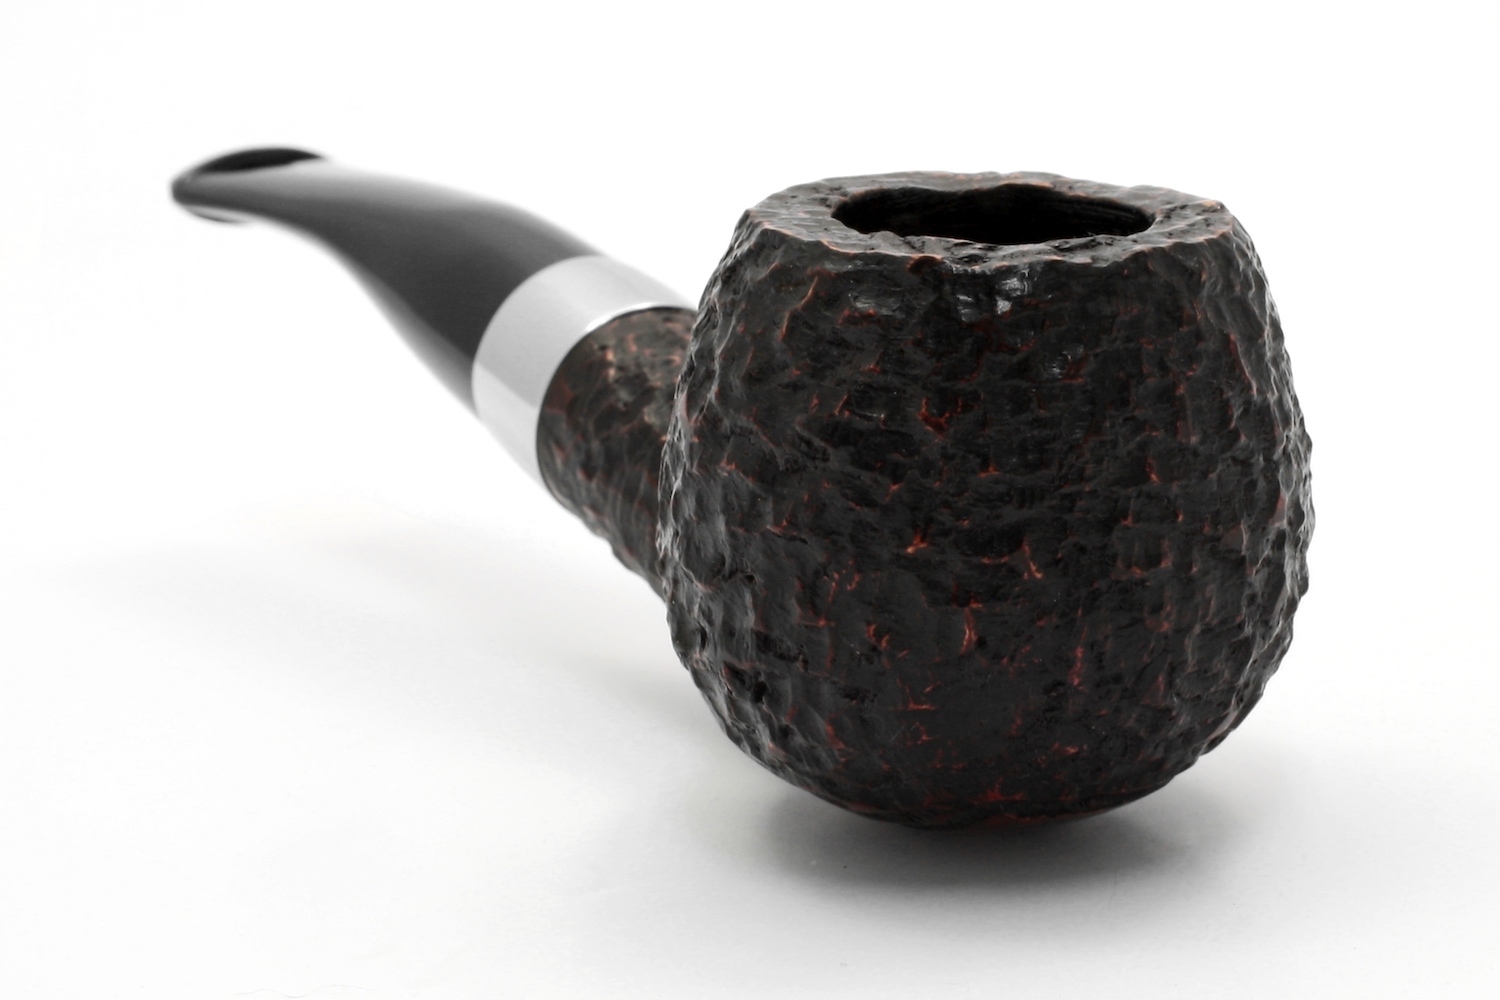 Peterson Donegal Rocky 408